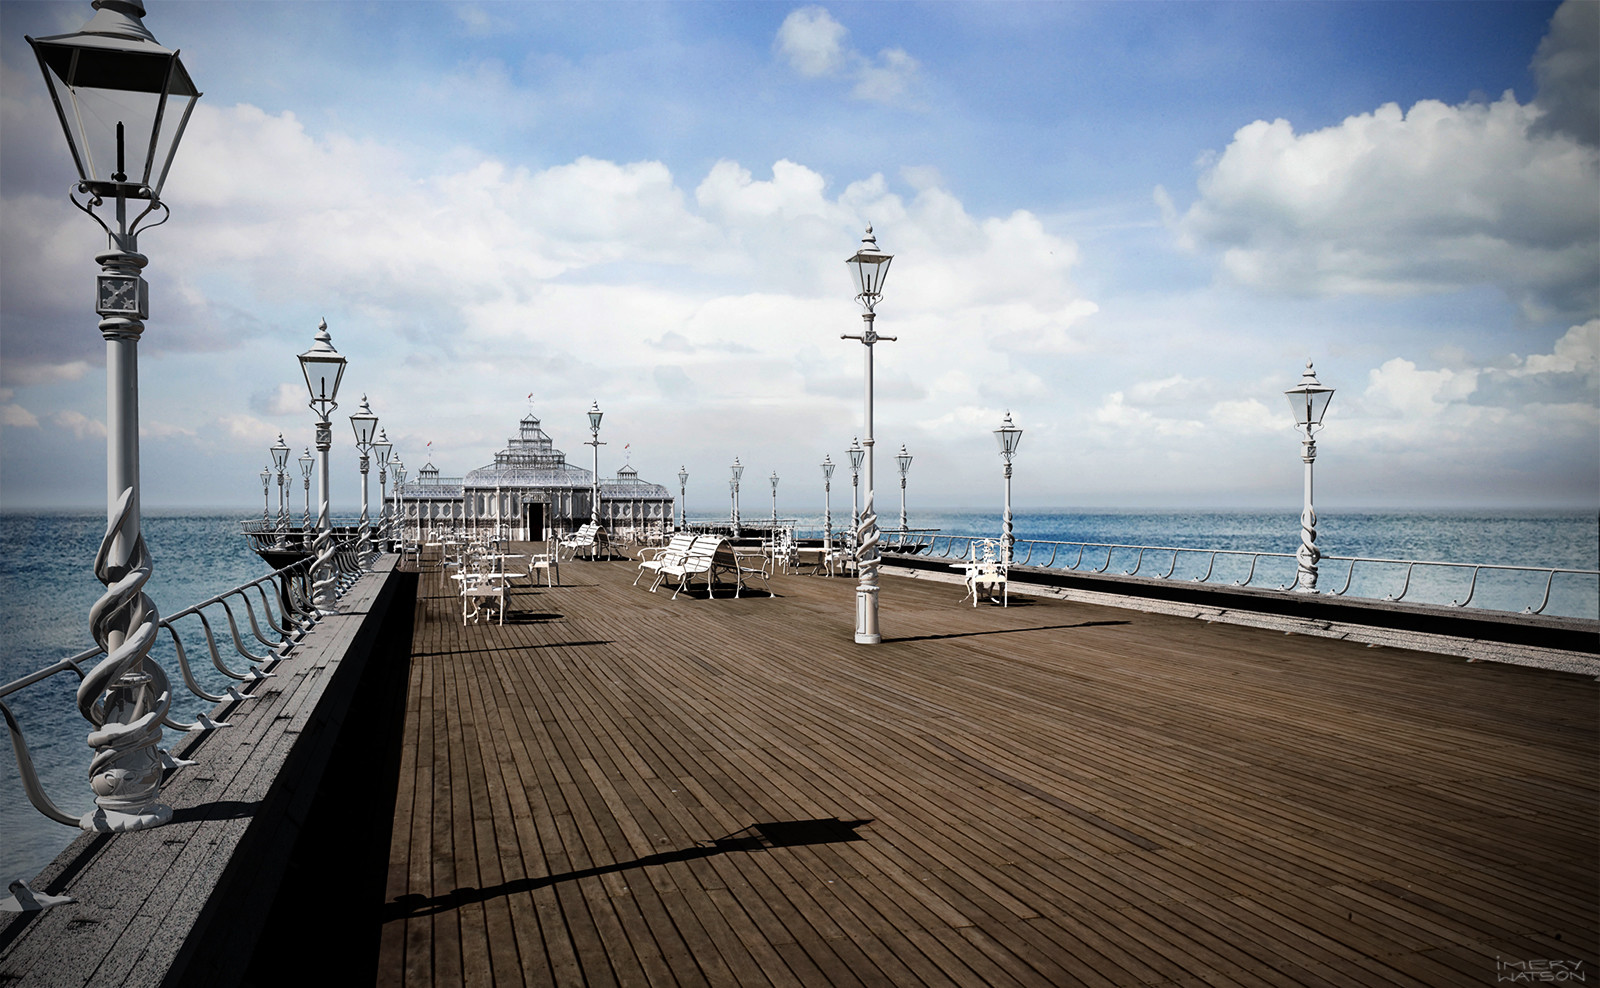 Pier concept done for the dream sequence in 'Sweeney Todd', done while at MPC London.